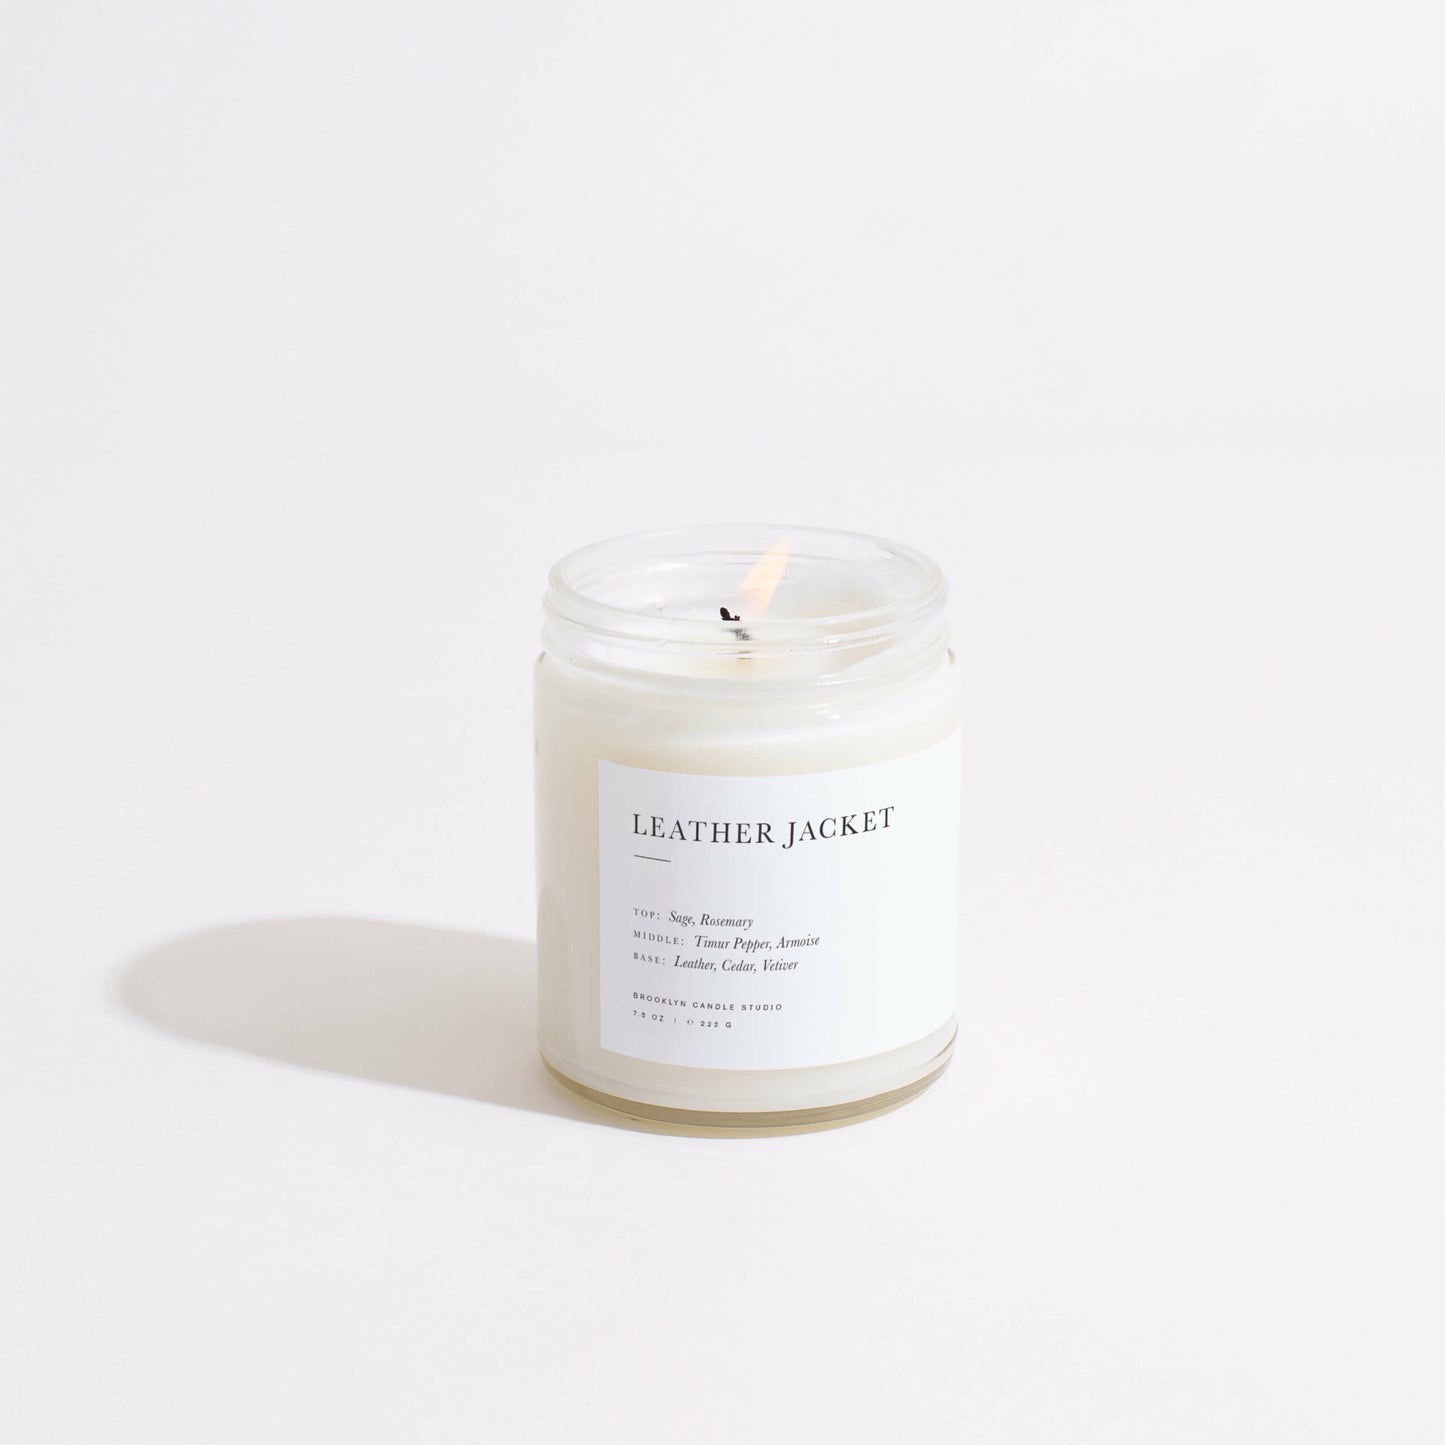 Brooklyn Candle Studio Leather Jacket Scented Candle - Osmology Scented Candles & Home Fragrance